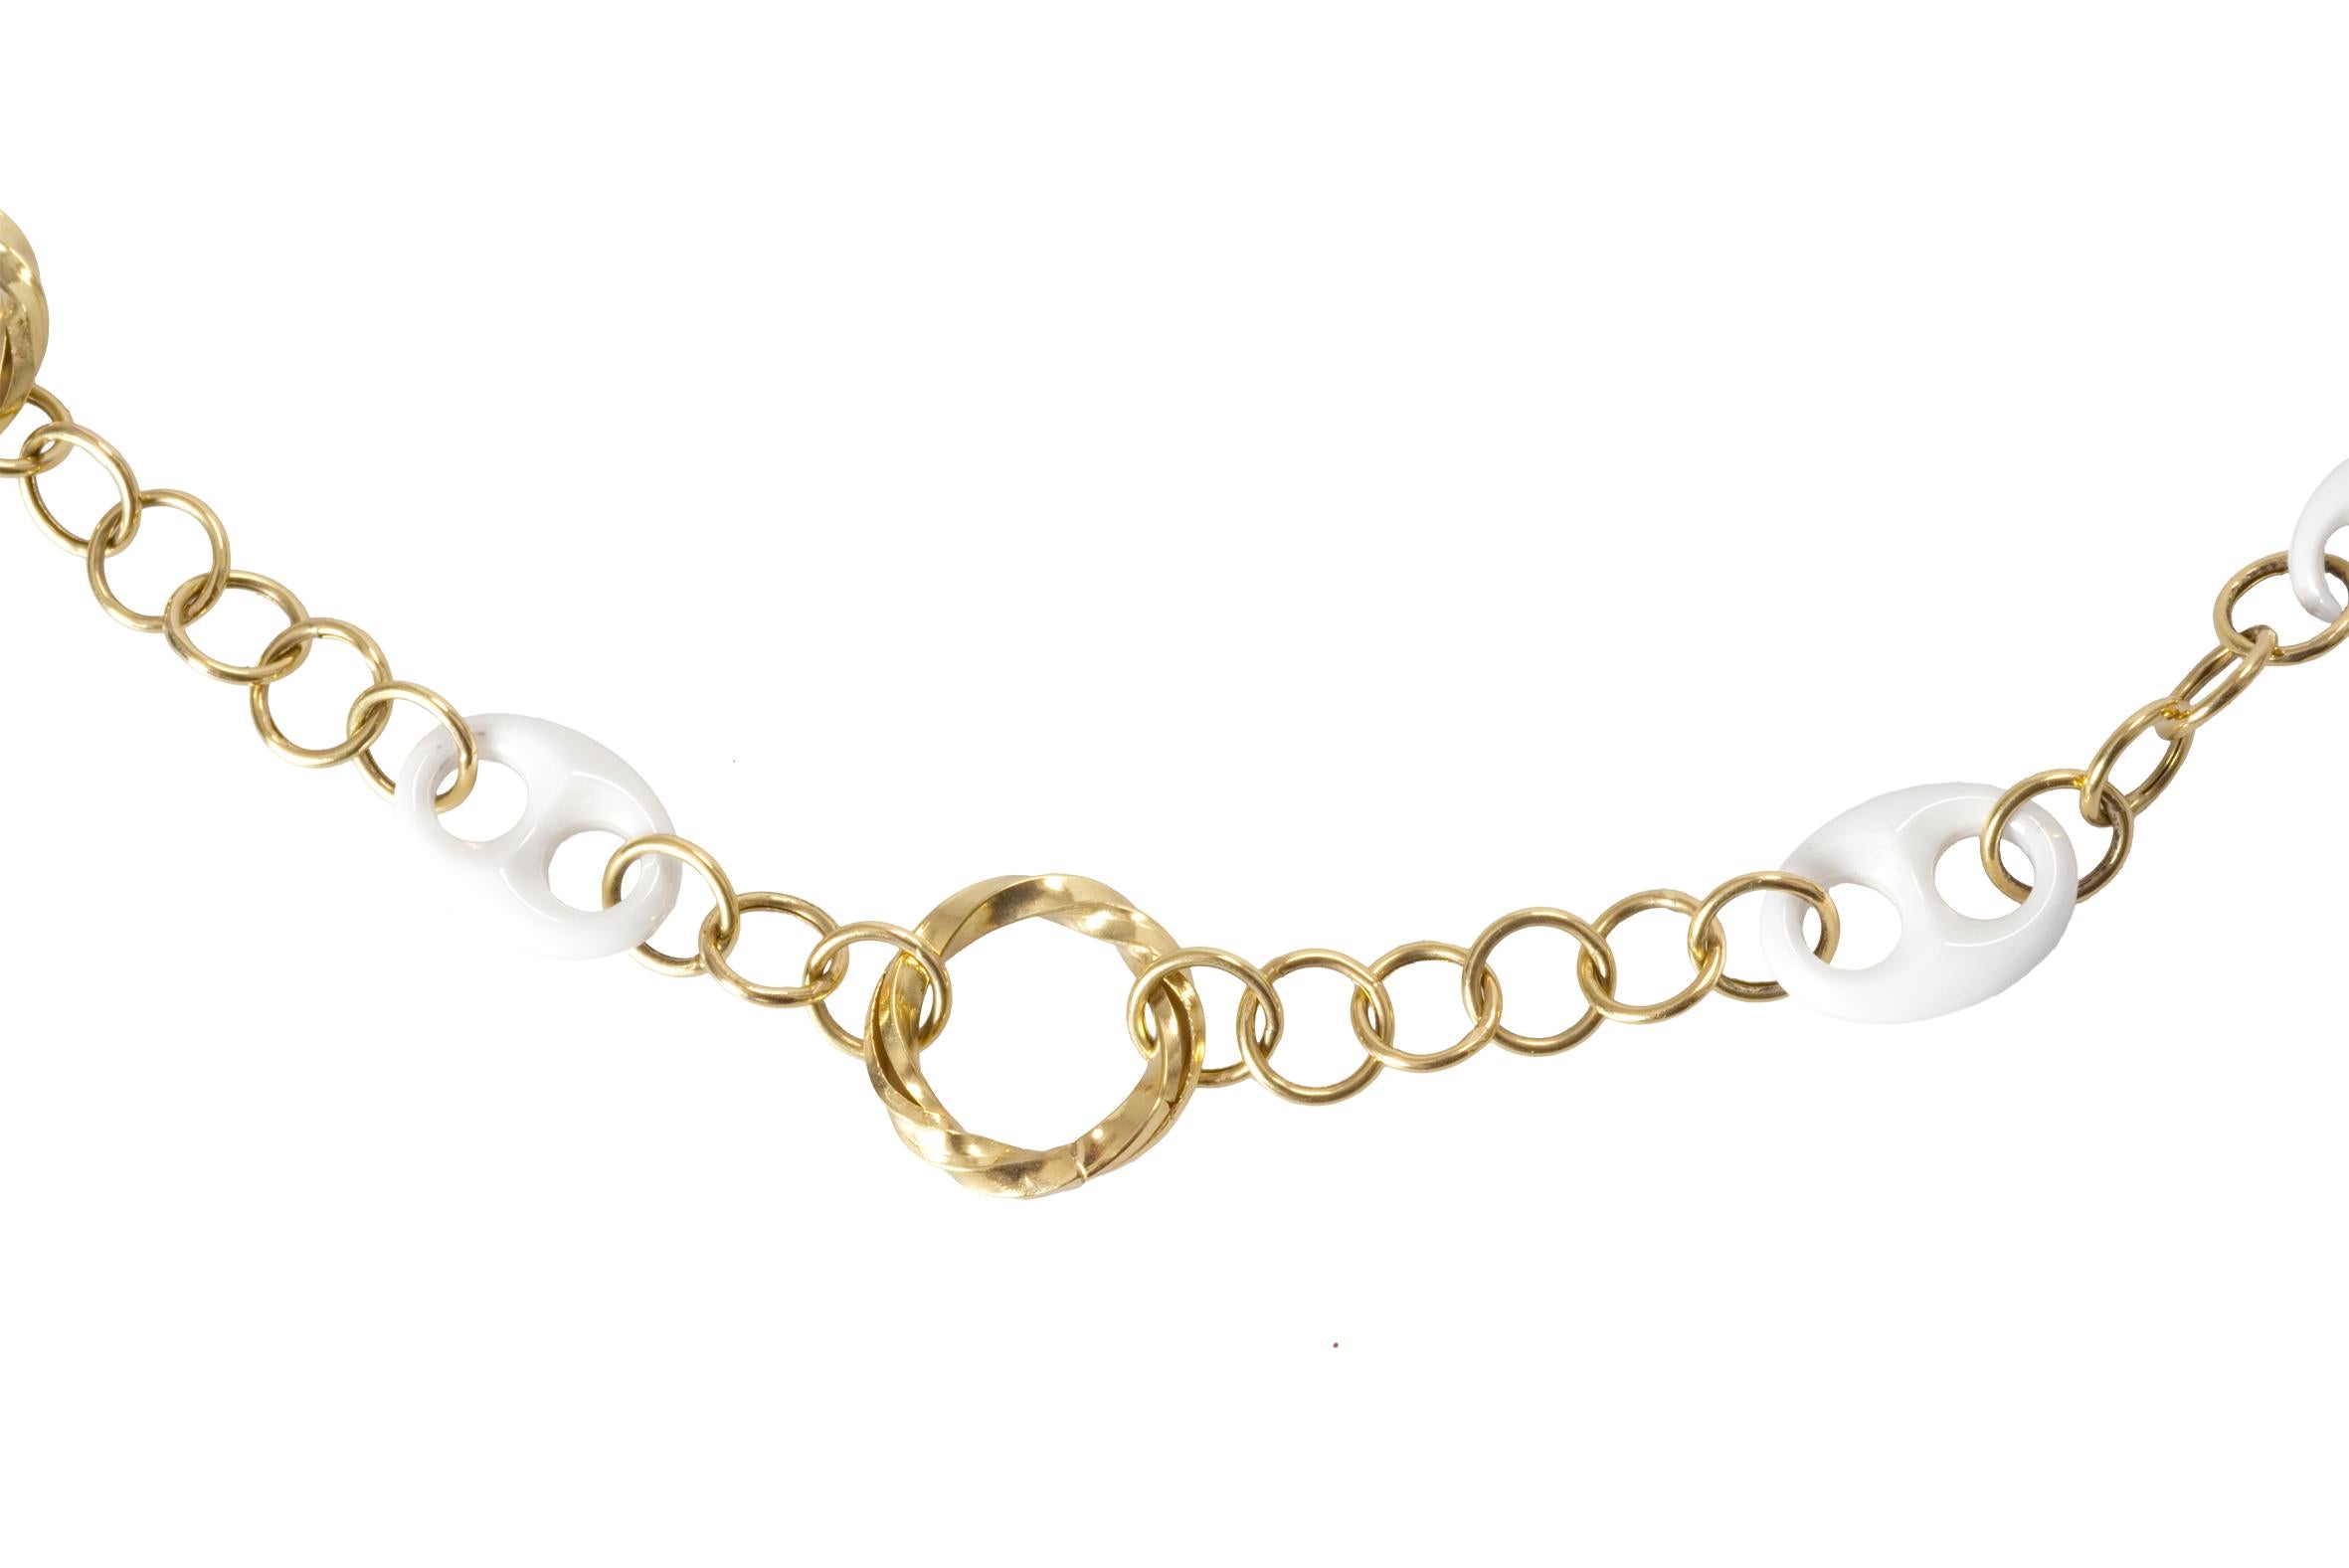 Contemporary Italian Hand Cast Yellow 18 Karat Gold Chain Necklace with White Ceramic Details